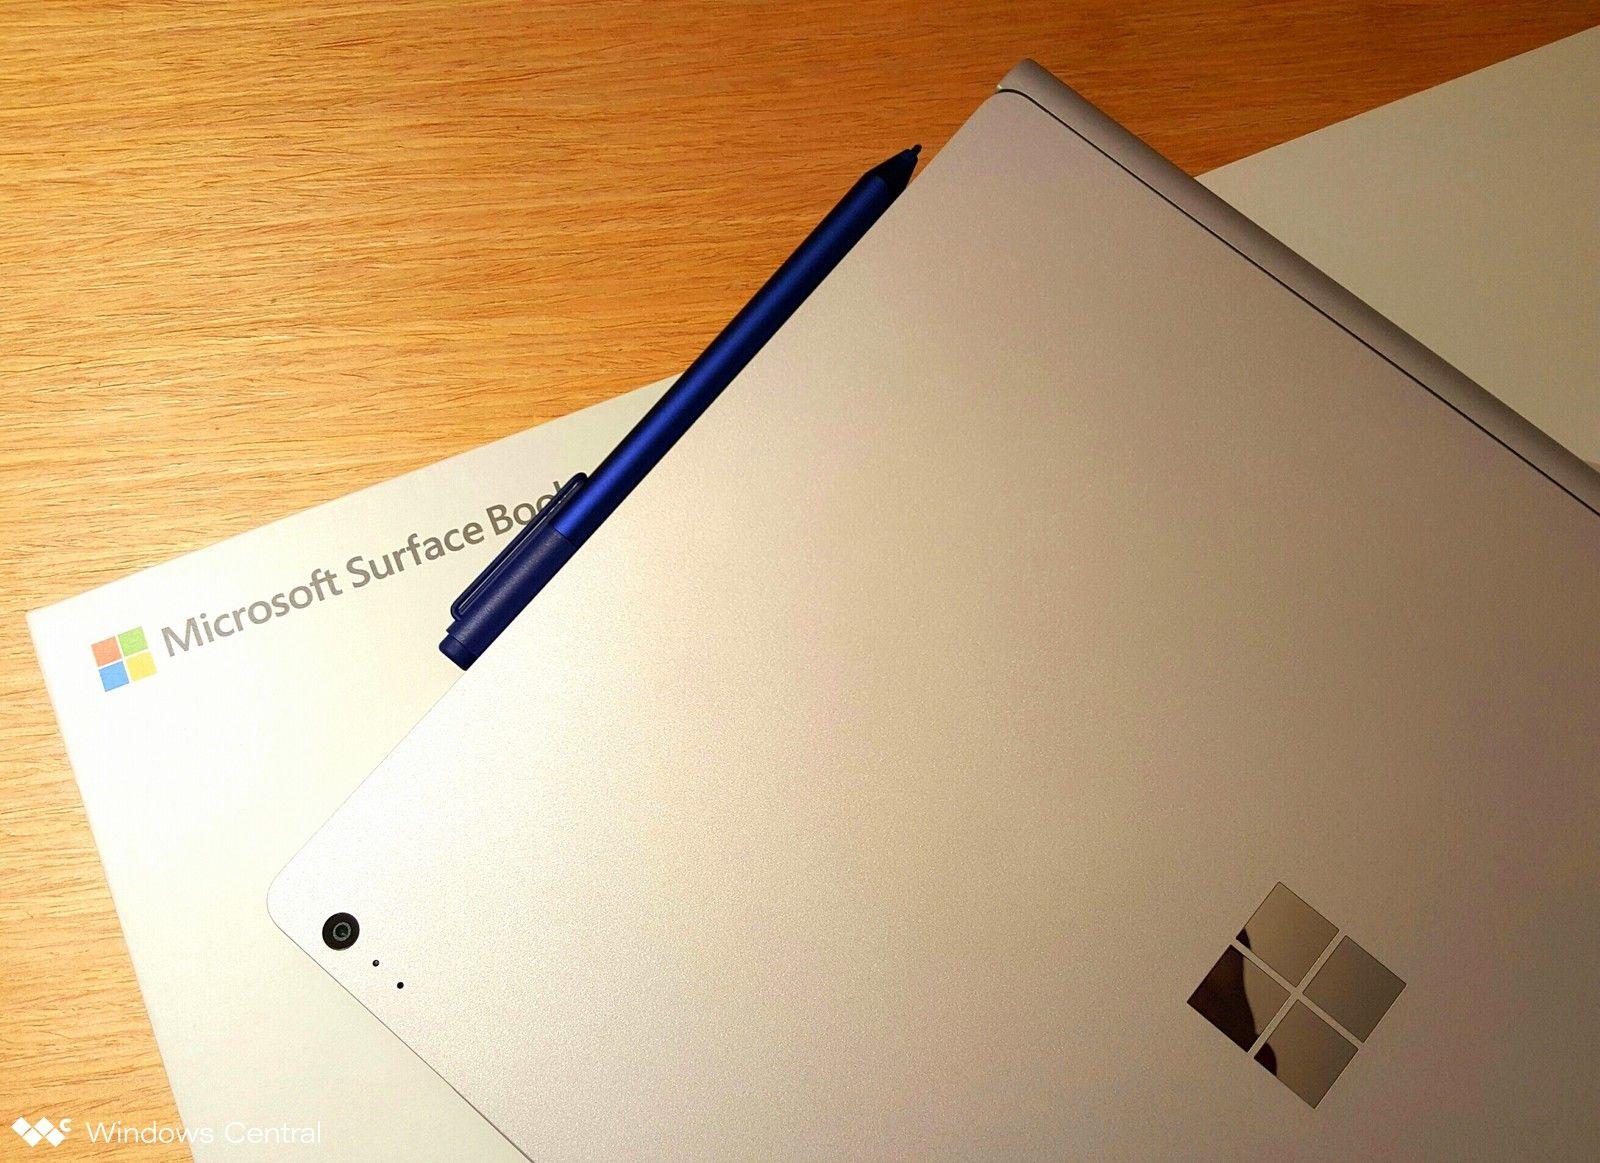 Microsoft Surface Pro 4 Logo - Surface Pro 4 and Surface Book user guides and recovery image